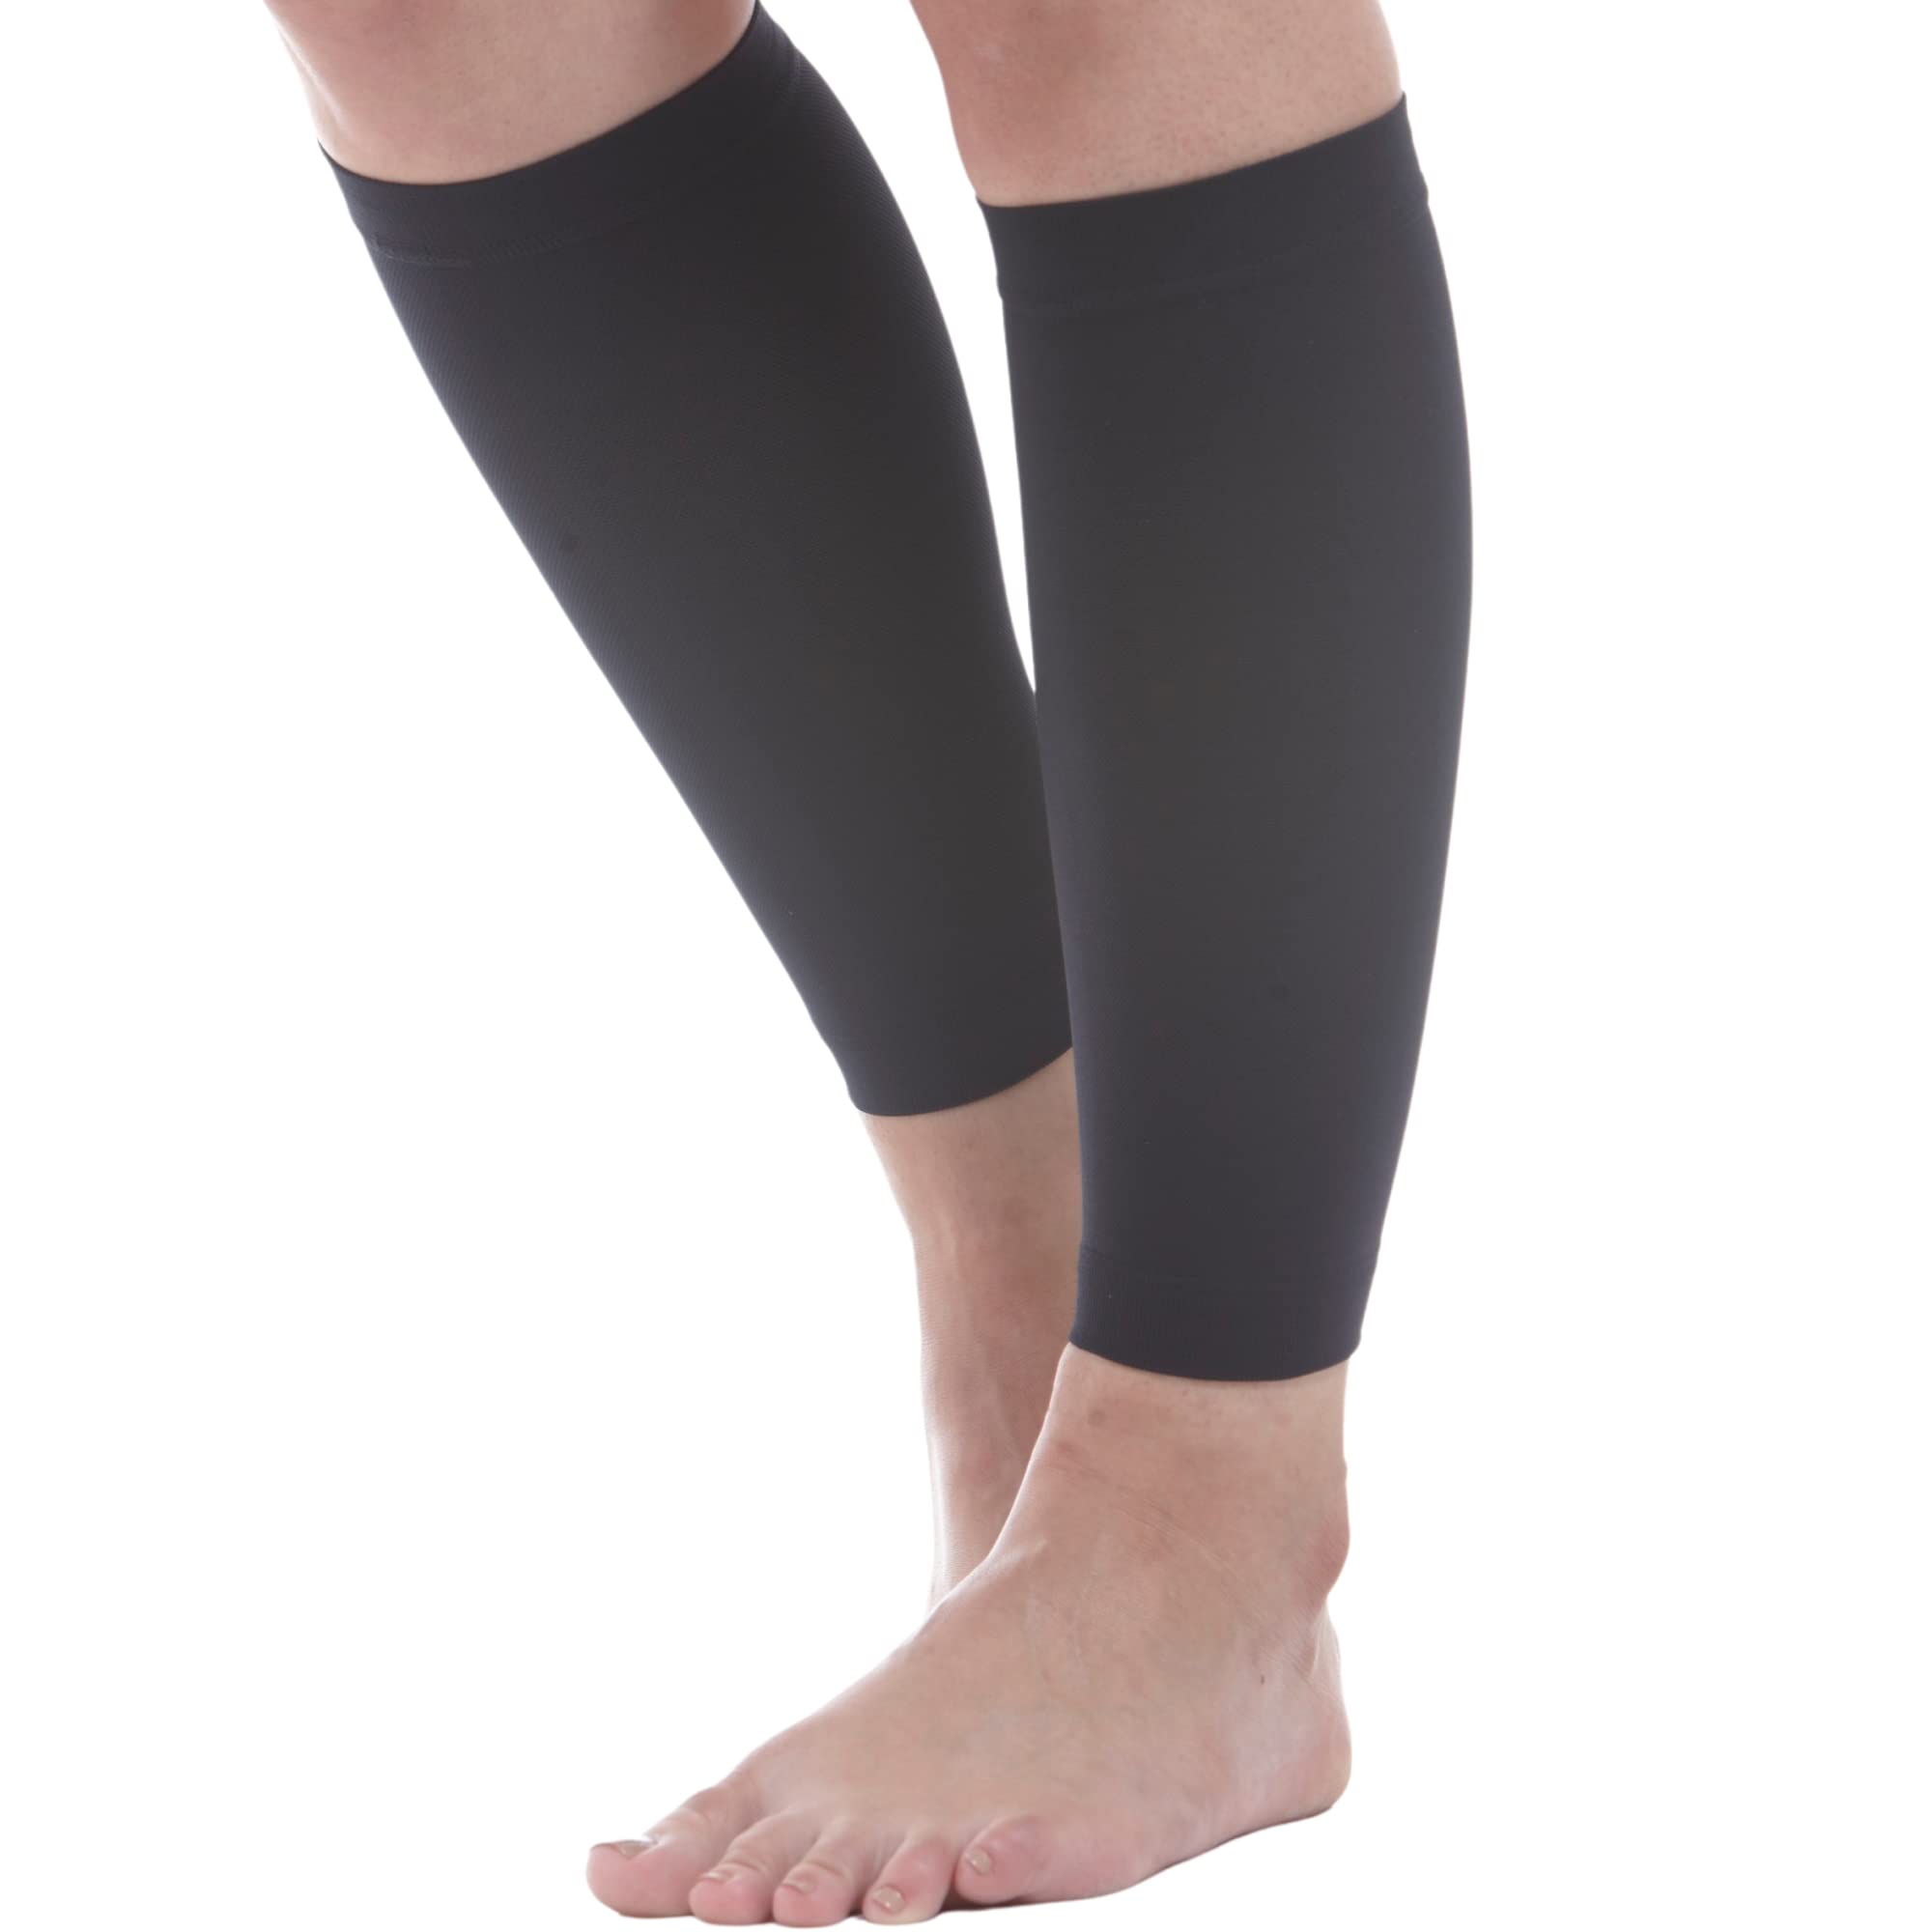 Made in USA - Unisex Compression Calf Sleeves 20-30mmHg for Calf